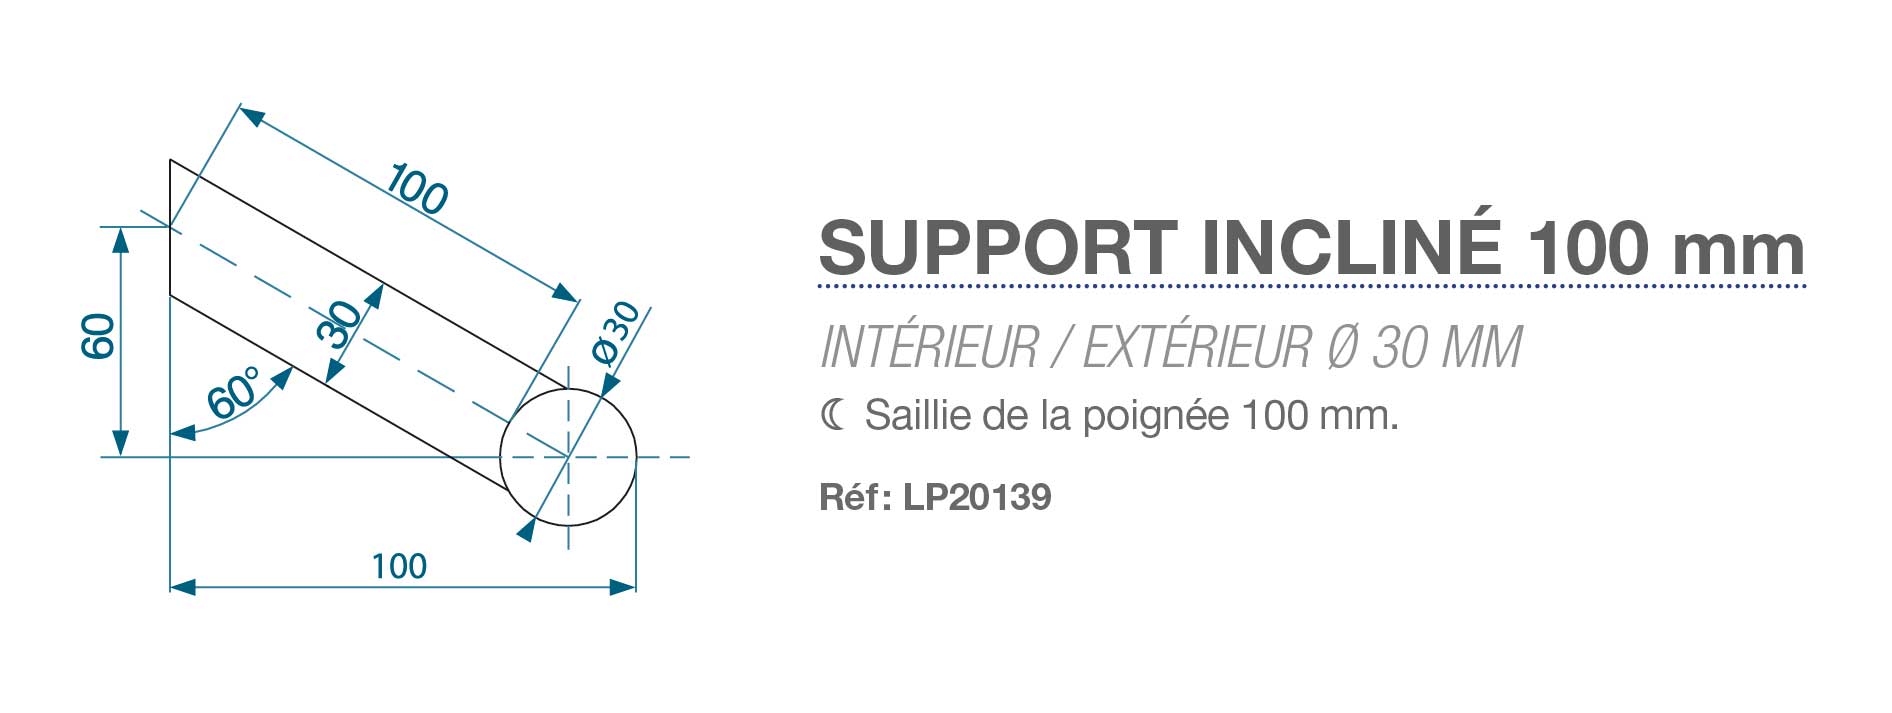 Support-incliné-100-mm_Diam30